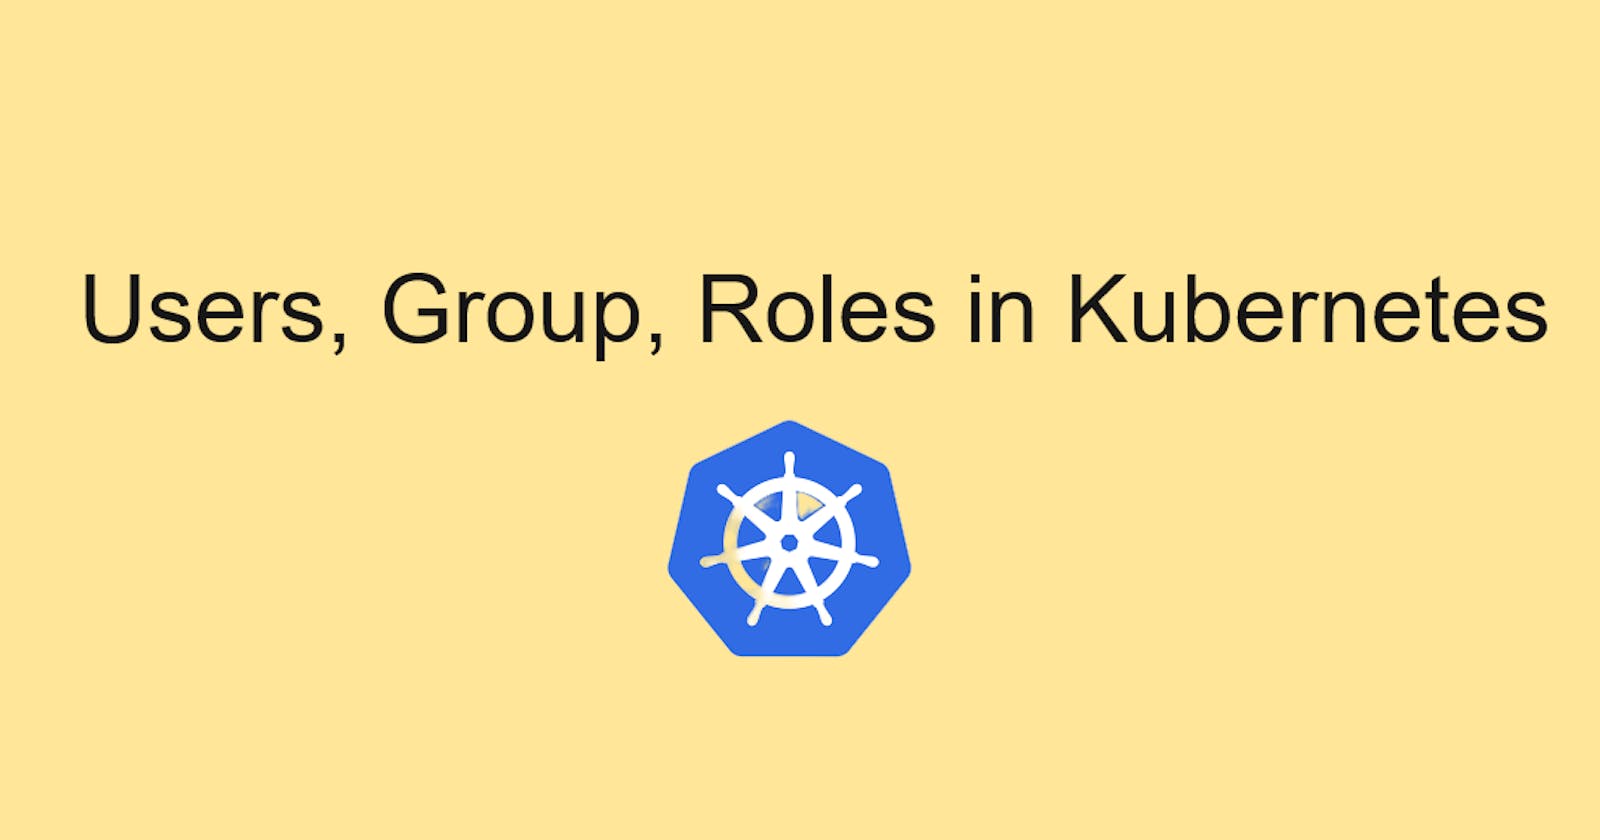 Users, Group, Roles in Kubernetes